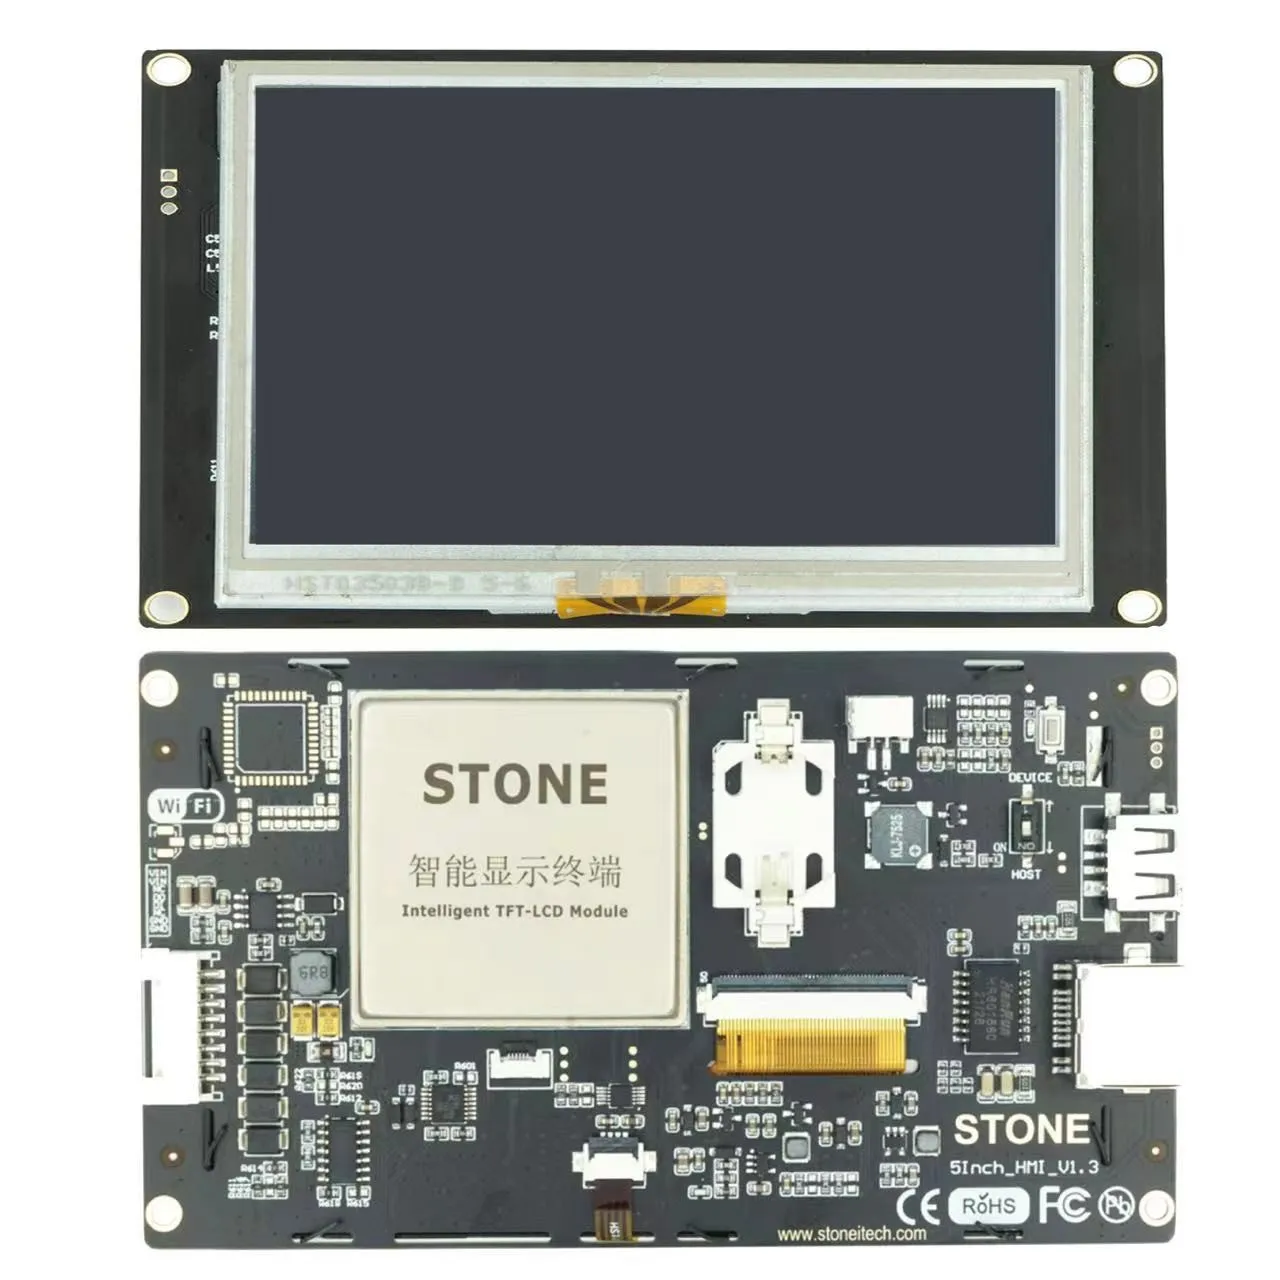 5 Inch LCD HMI Serial Display Module with Program + Touch Screen for Indusrial Equipment Panel STWI070WT-01